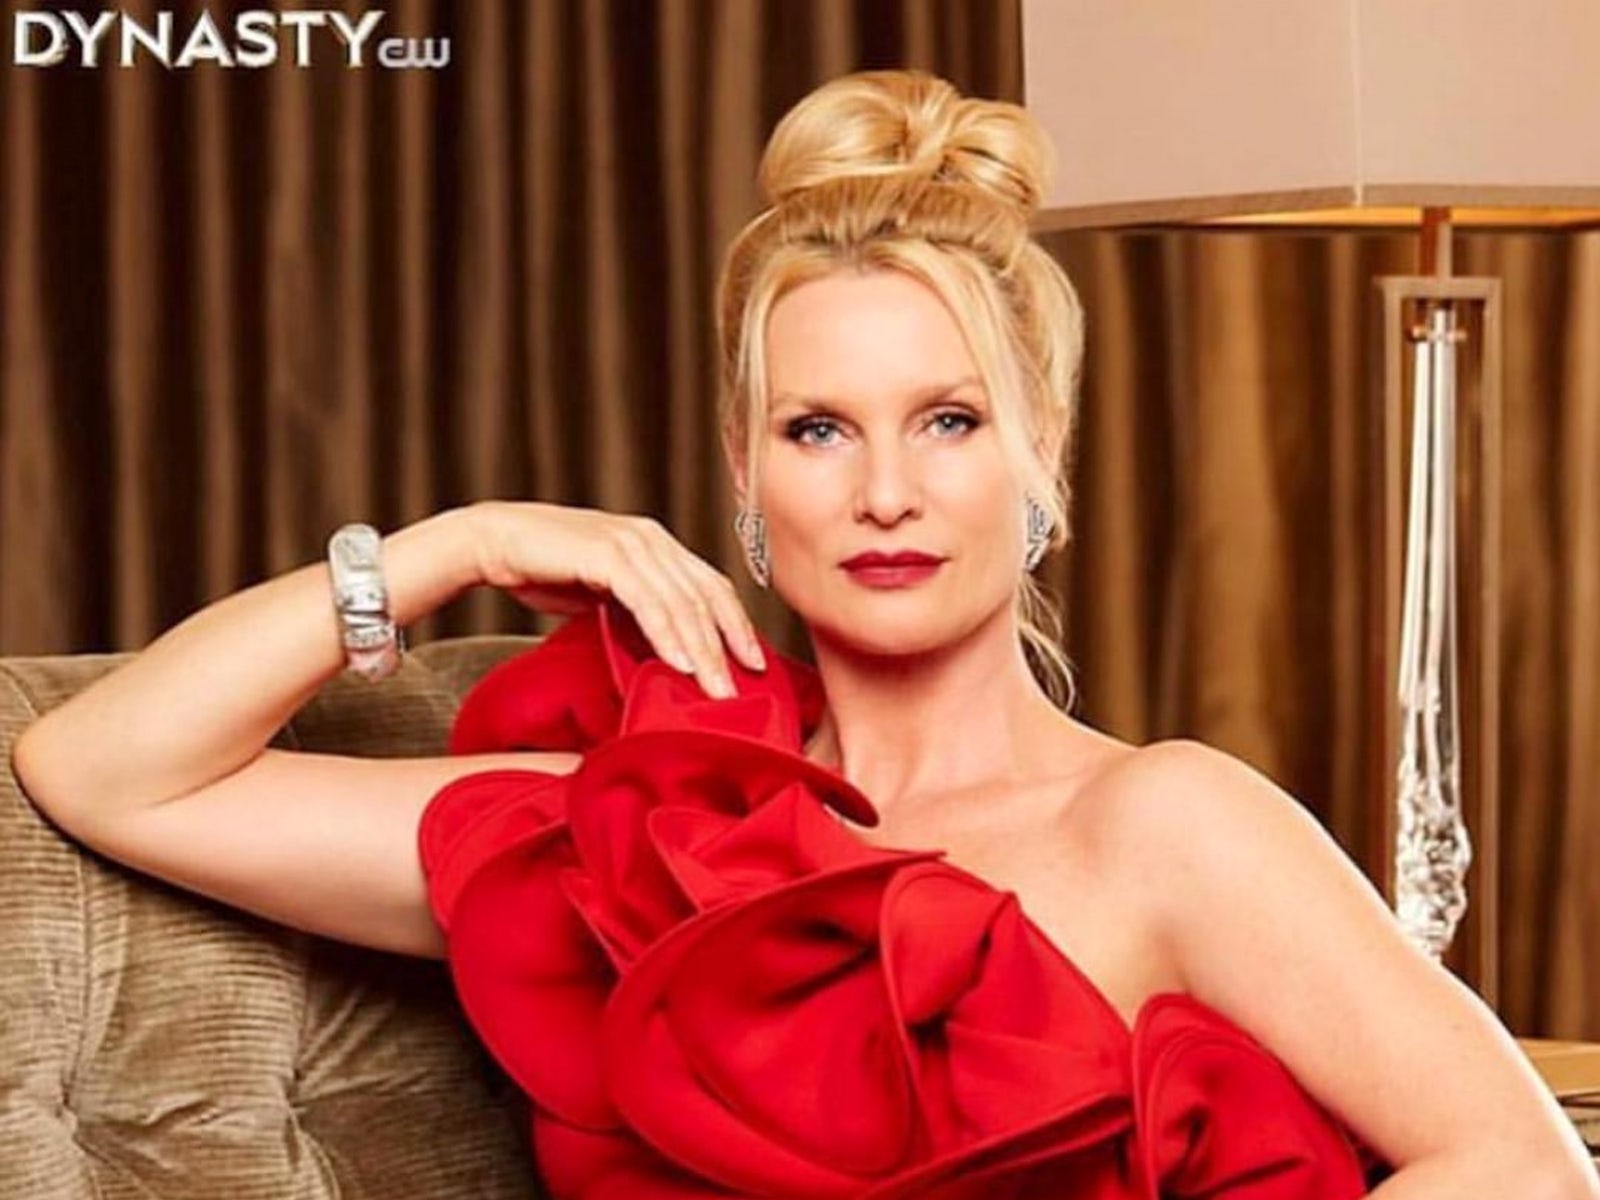 Nicollette Sheridan leaving The CW's 'Dynasty' to focus on family